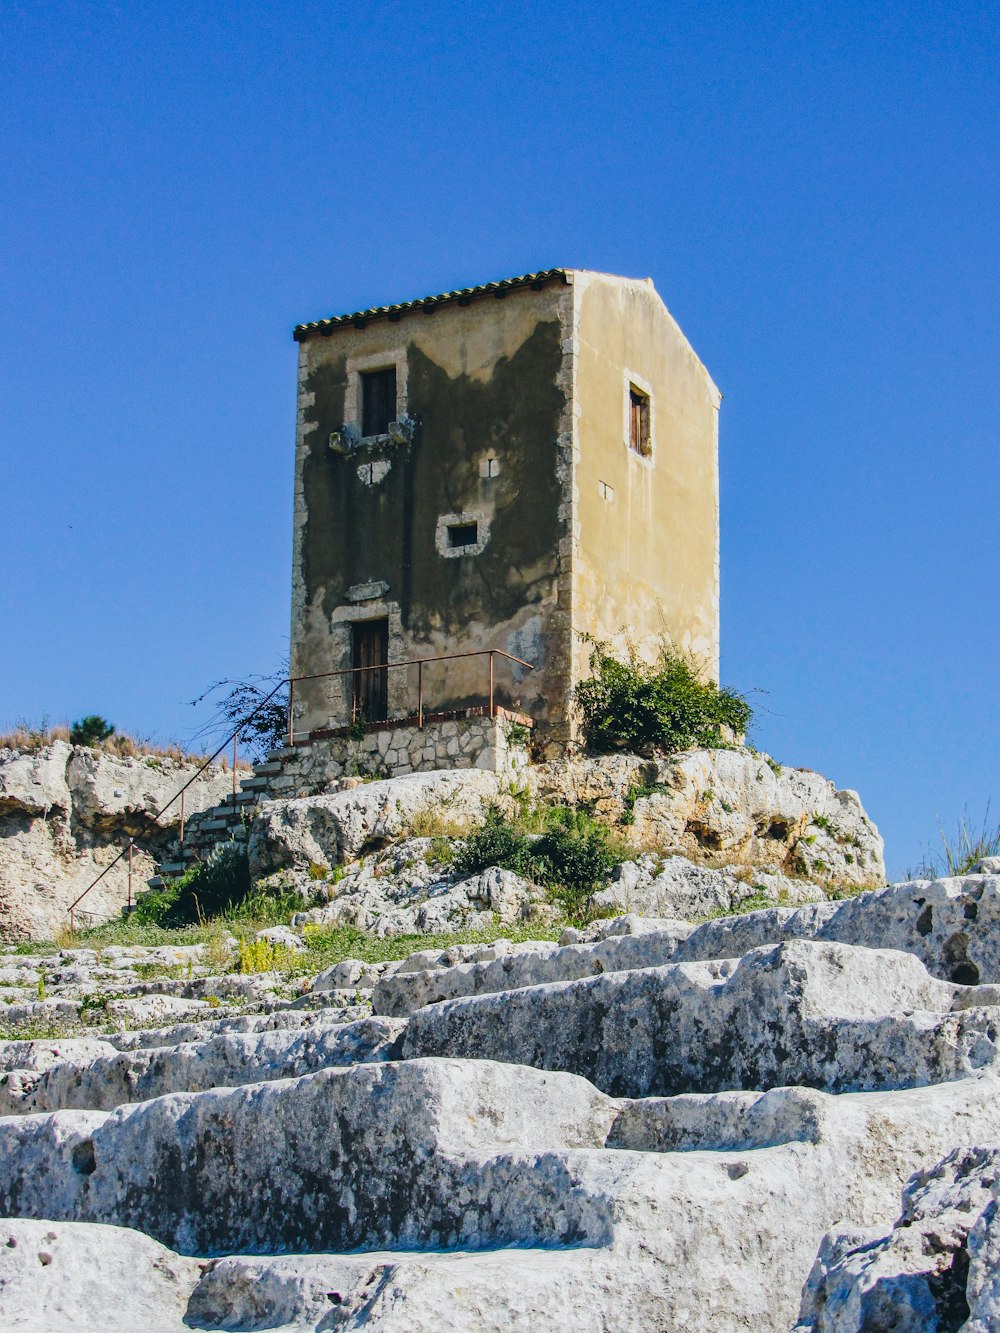 a stone building on a hill